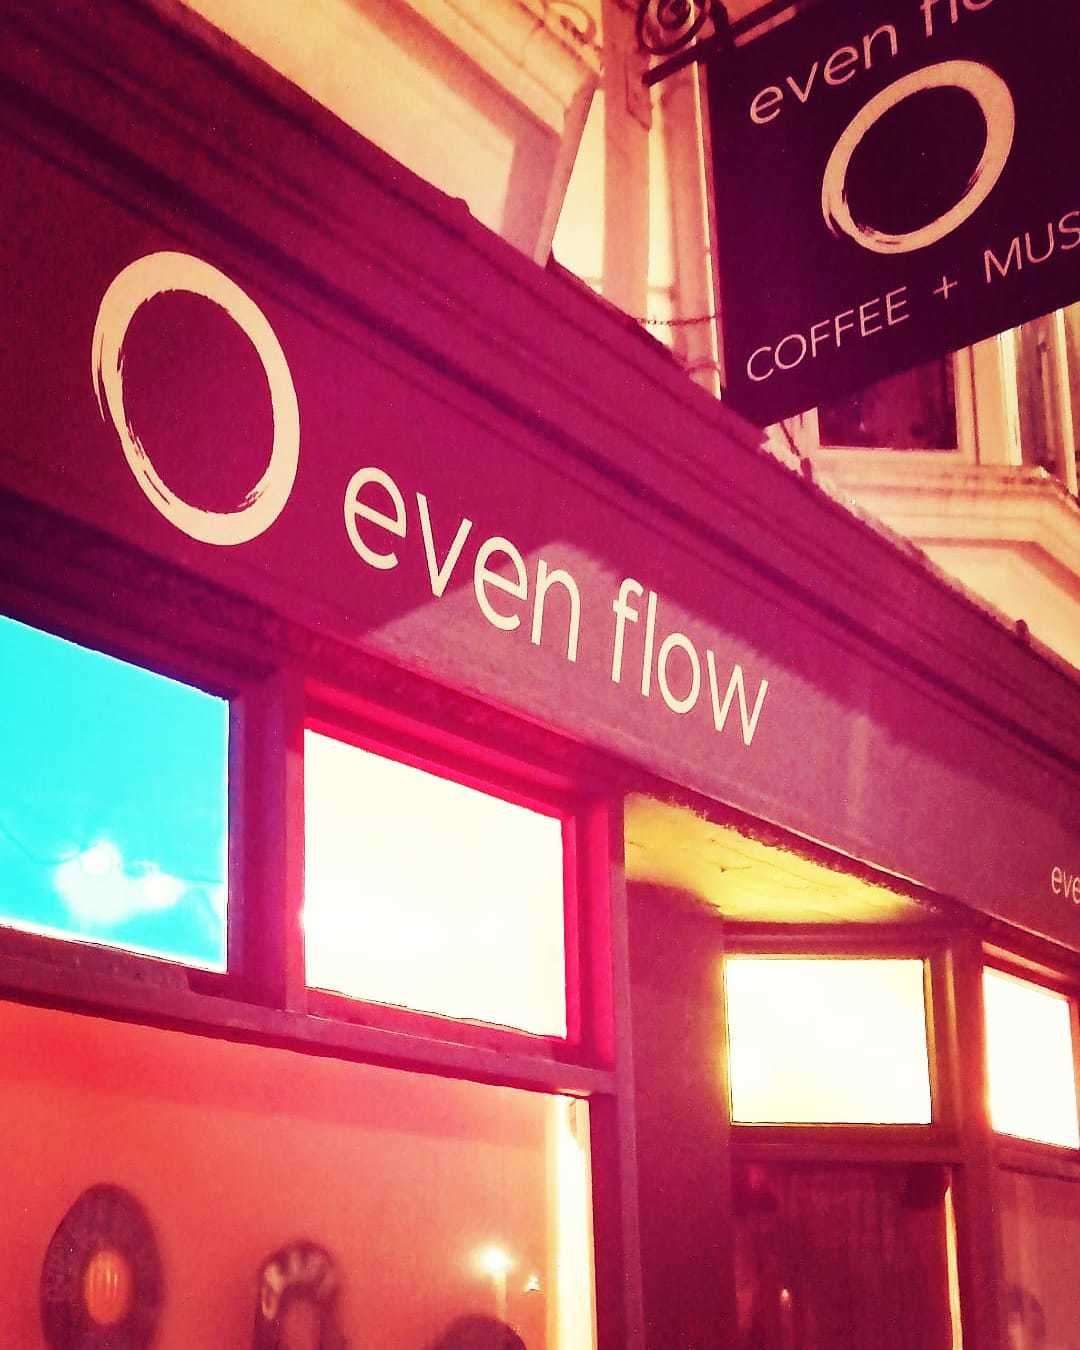 even flow is opening a new branch in the Royal Victoria Place, Tunbridge Wells